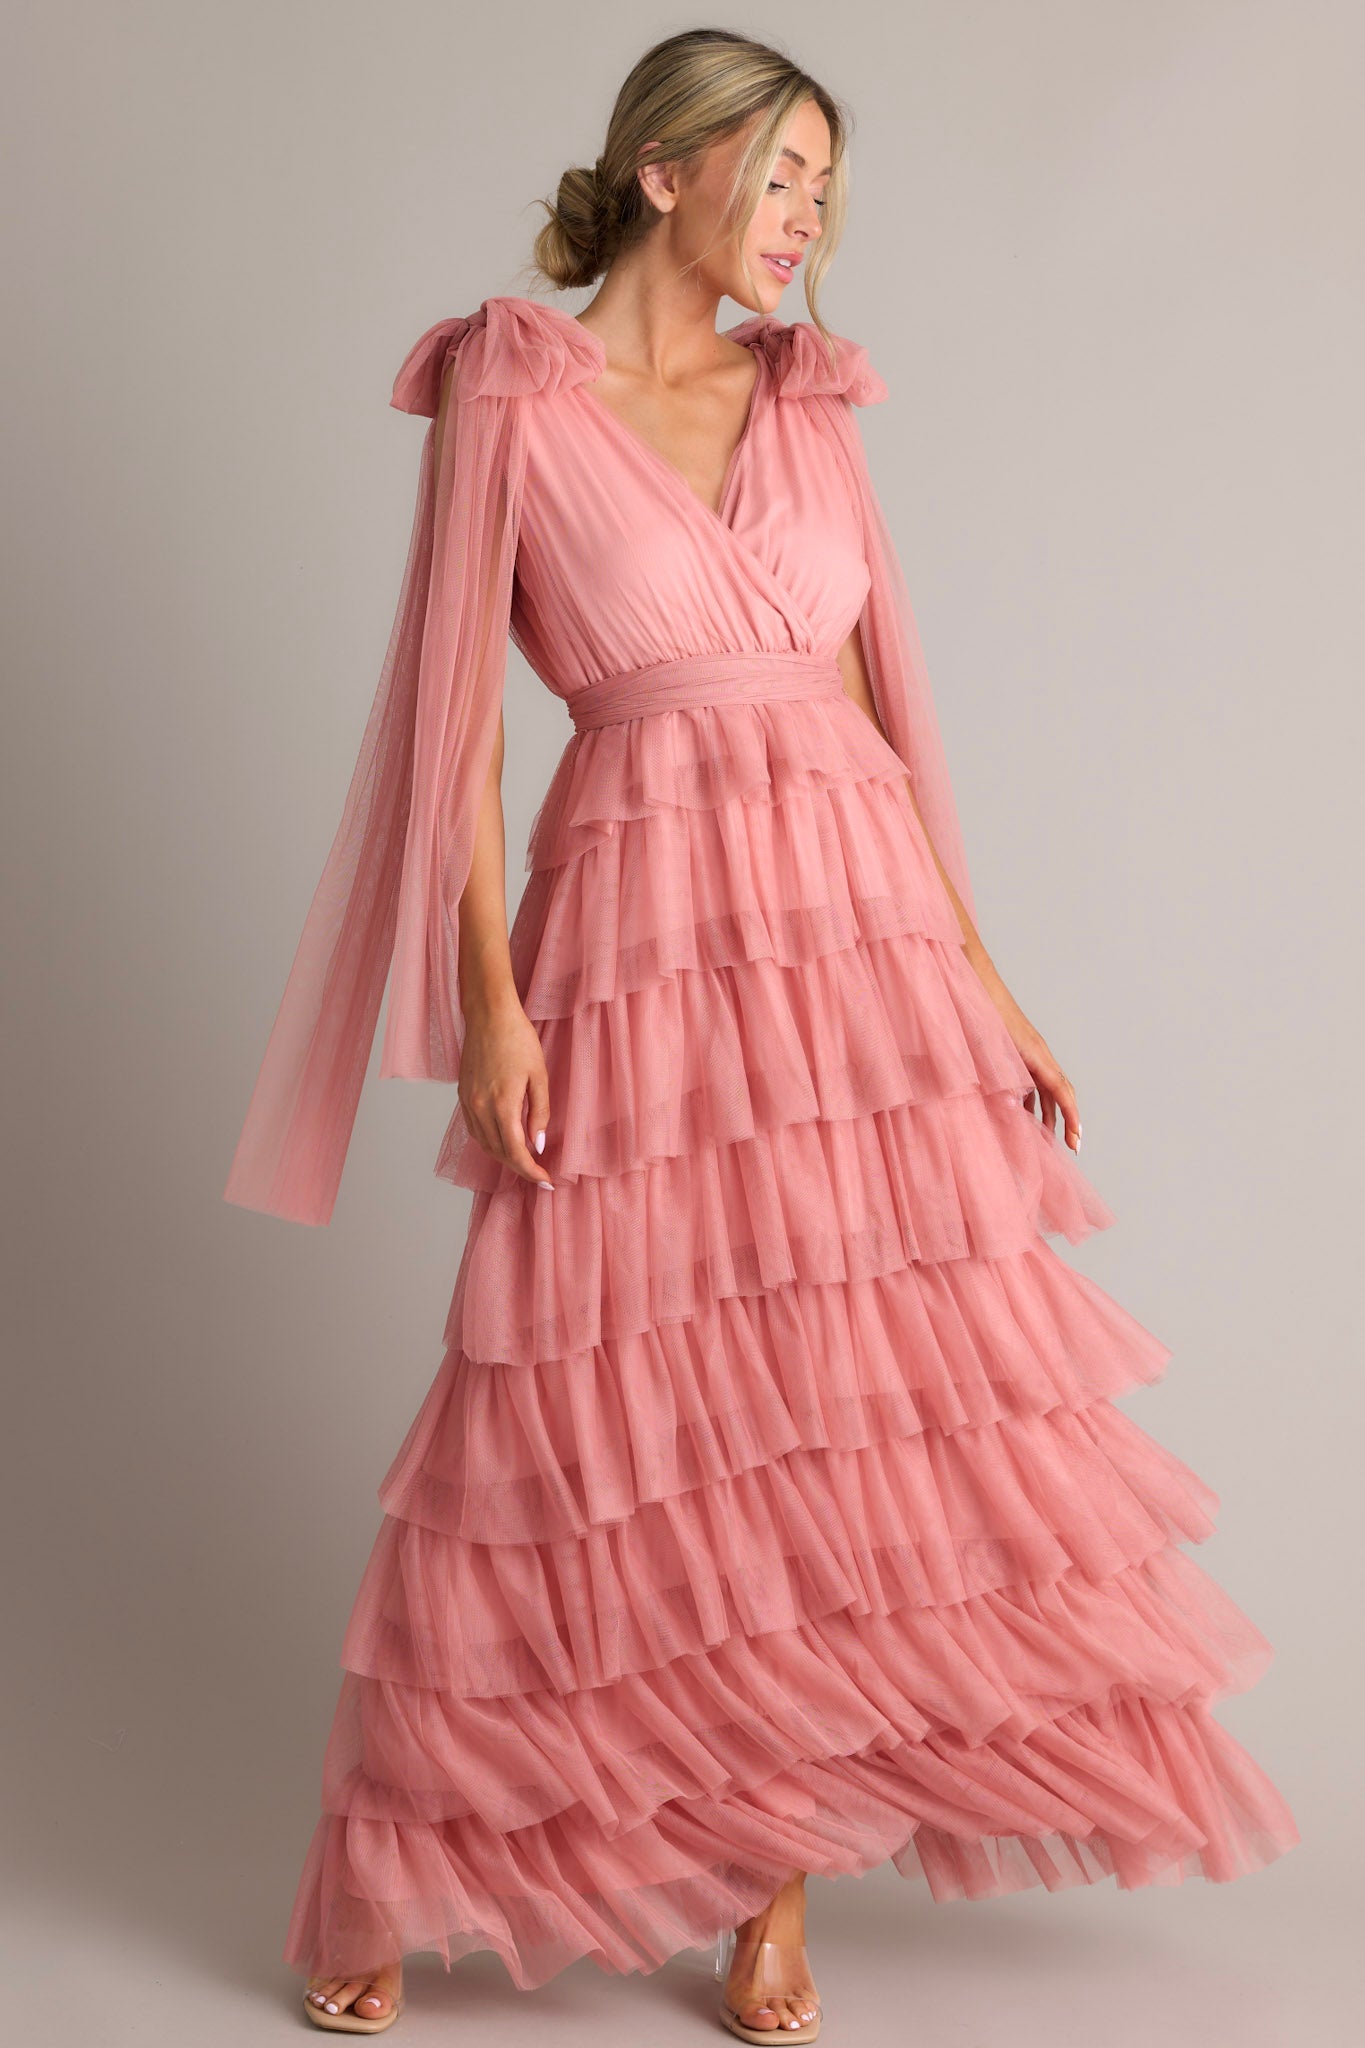 Pink dress featuring a flattering v-neckline, graceful fabric trailing from the shoulders, a chic self-tie waist belt, and multiple tiers and layers of ethereal tulle for a whimsical touch.